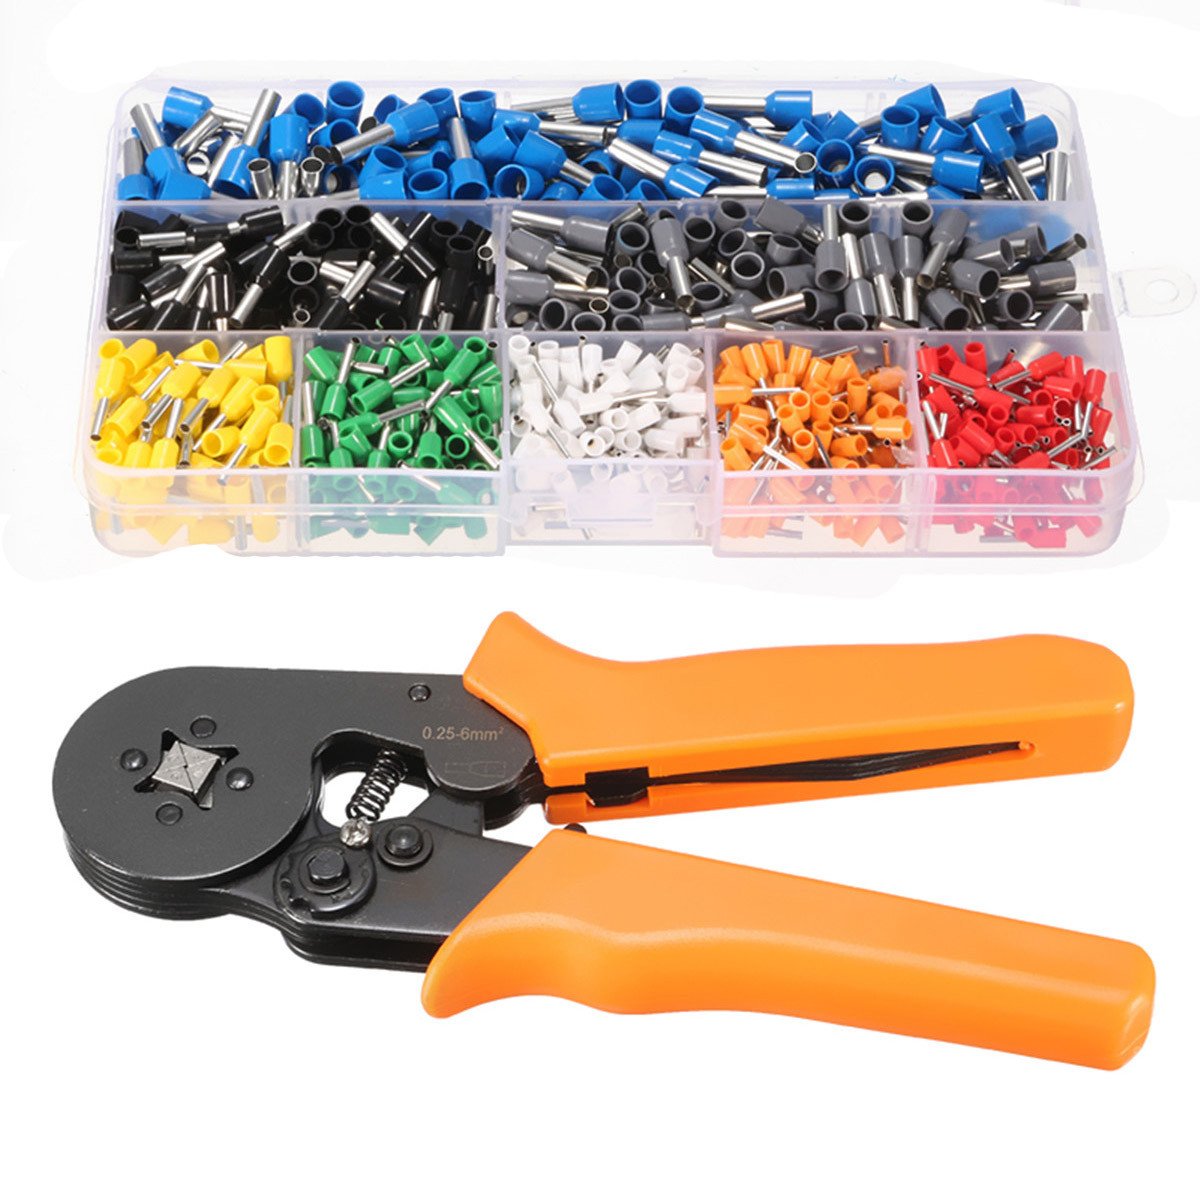 DANIU 23AWG to 10AWG Self Adjusting Ratcheting Ferrule Crimper Plier Tool with 800pcs Connector Terminal 2